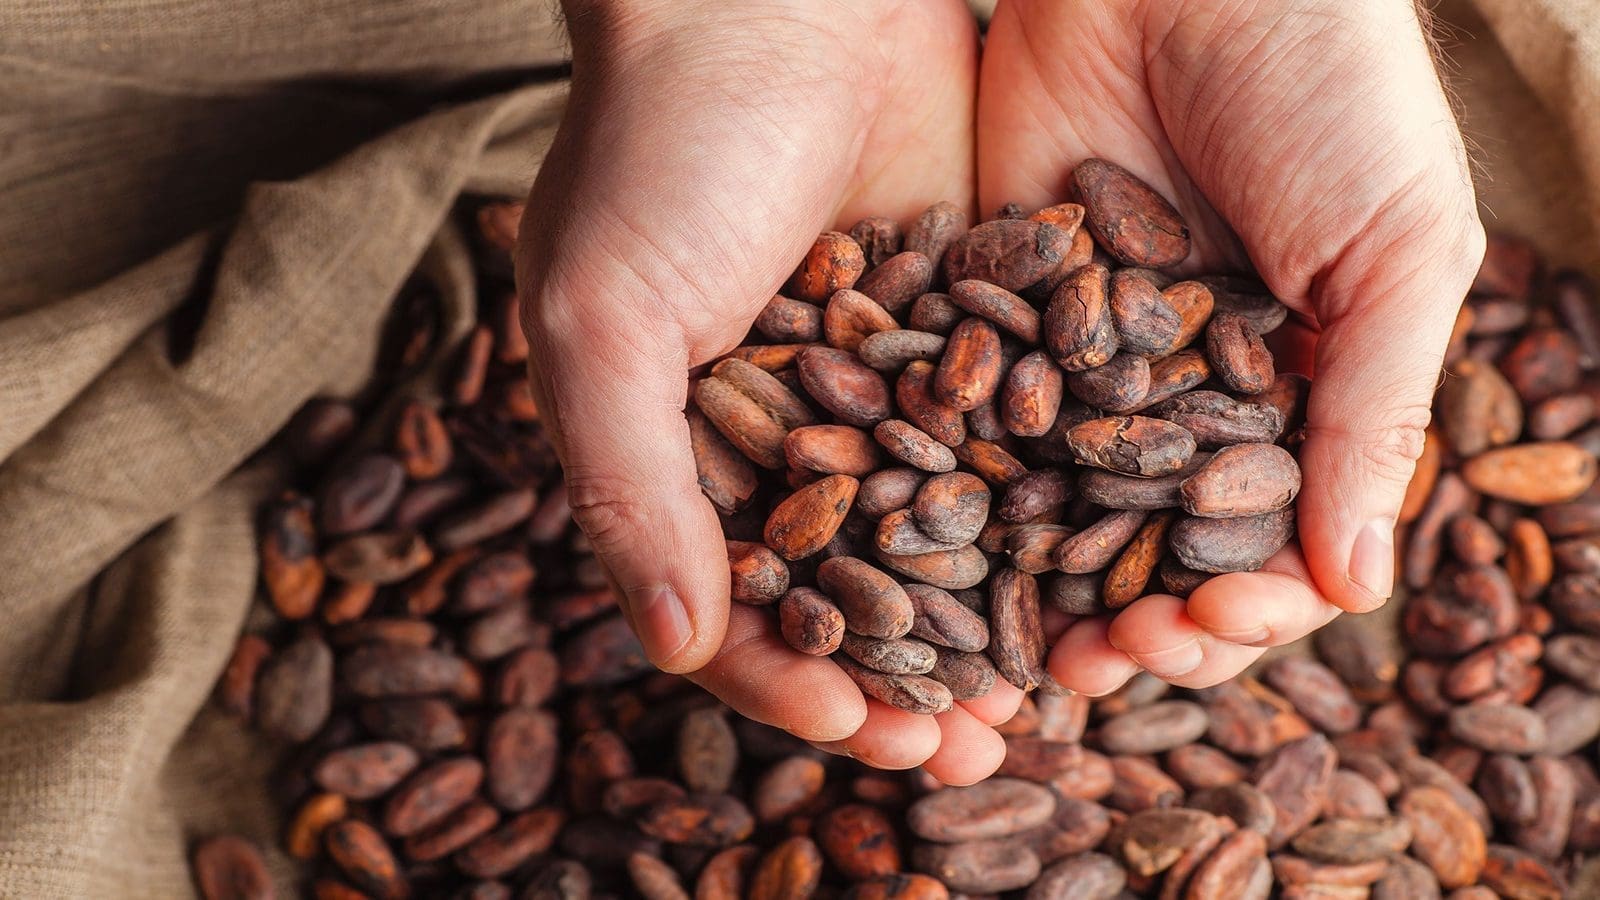 Study advises mitigation measures for Cadmium and Lead levels in cocoa